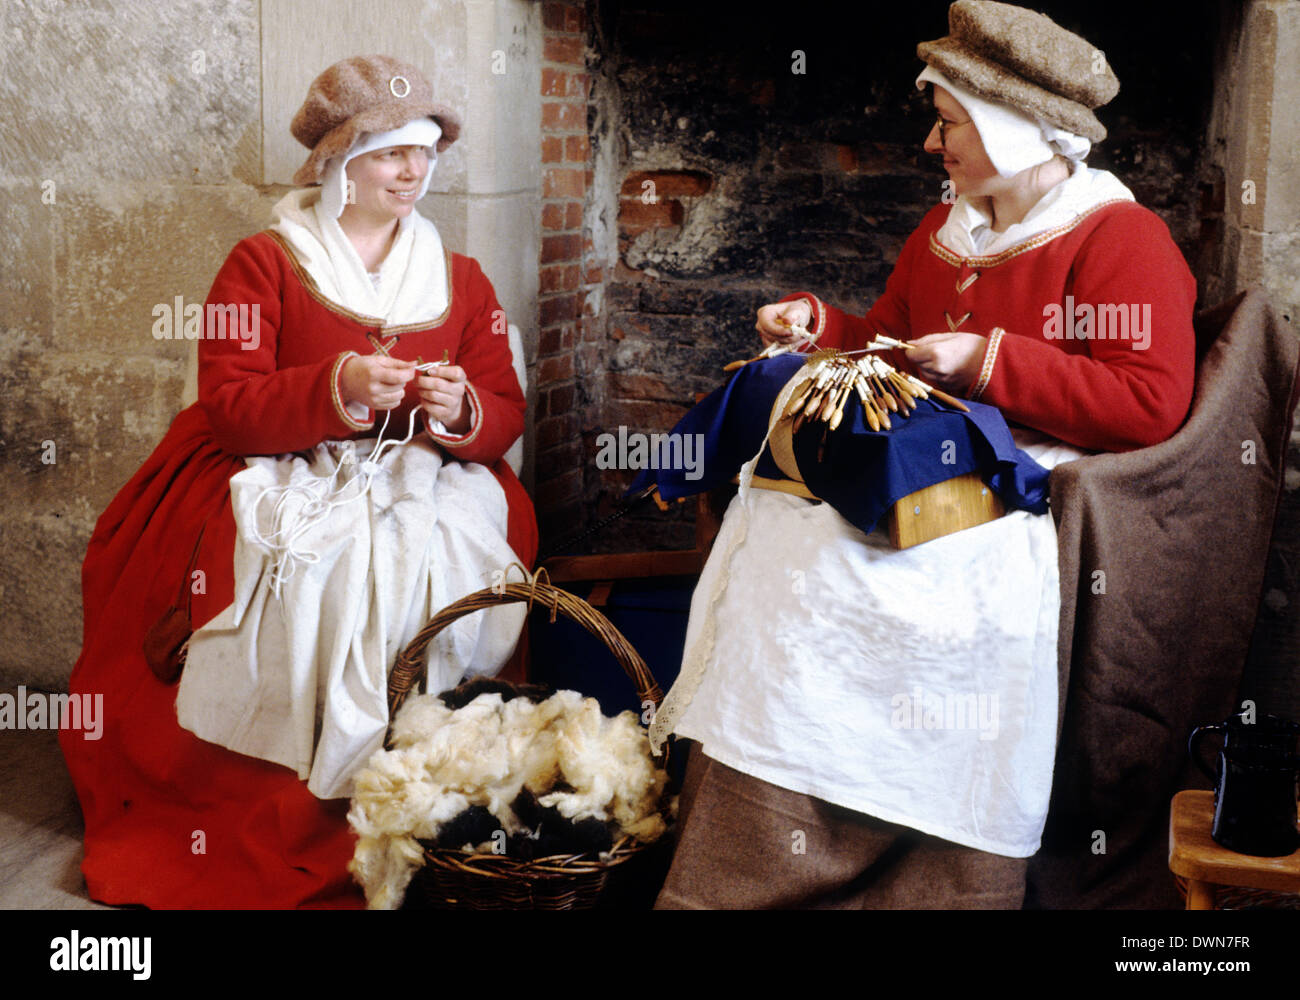 Tudor Period women, domestic labours, spinning wool, making lace, late 16th century English historical re-enactment women fashion fashions costume costumes England UK Stock Photo